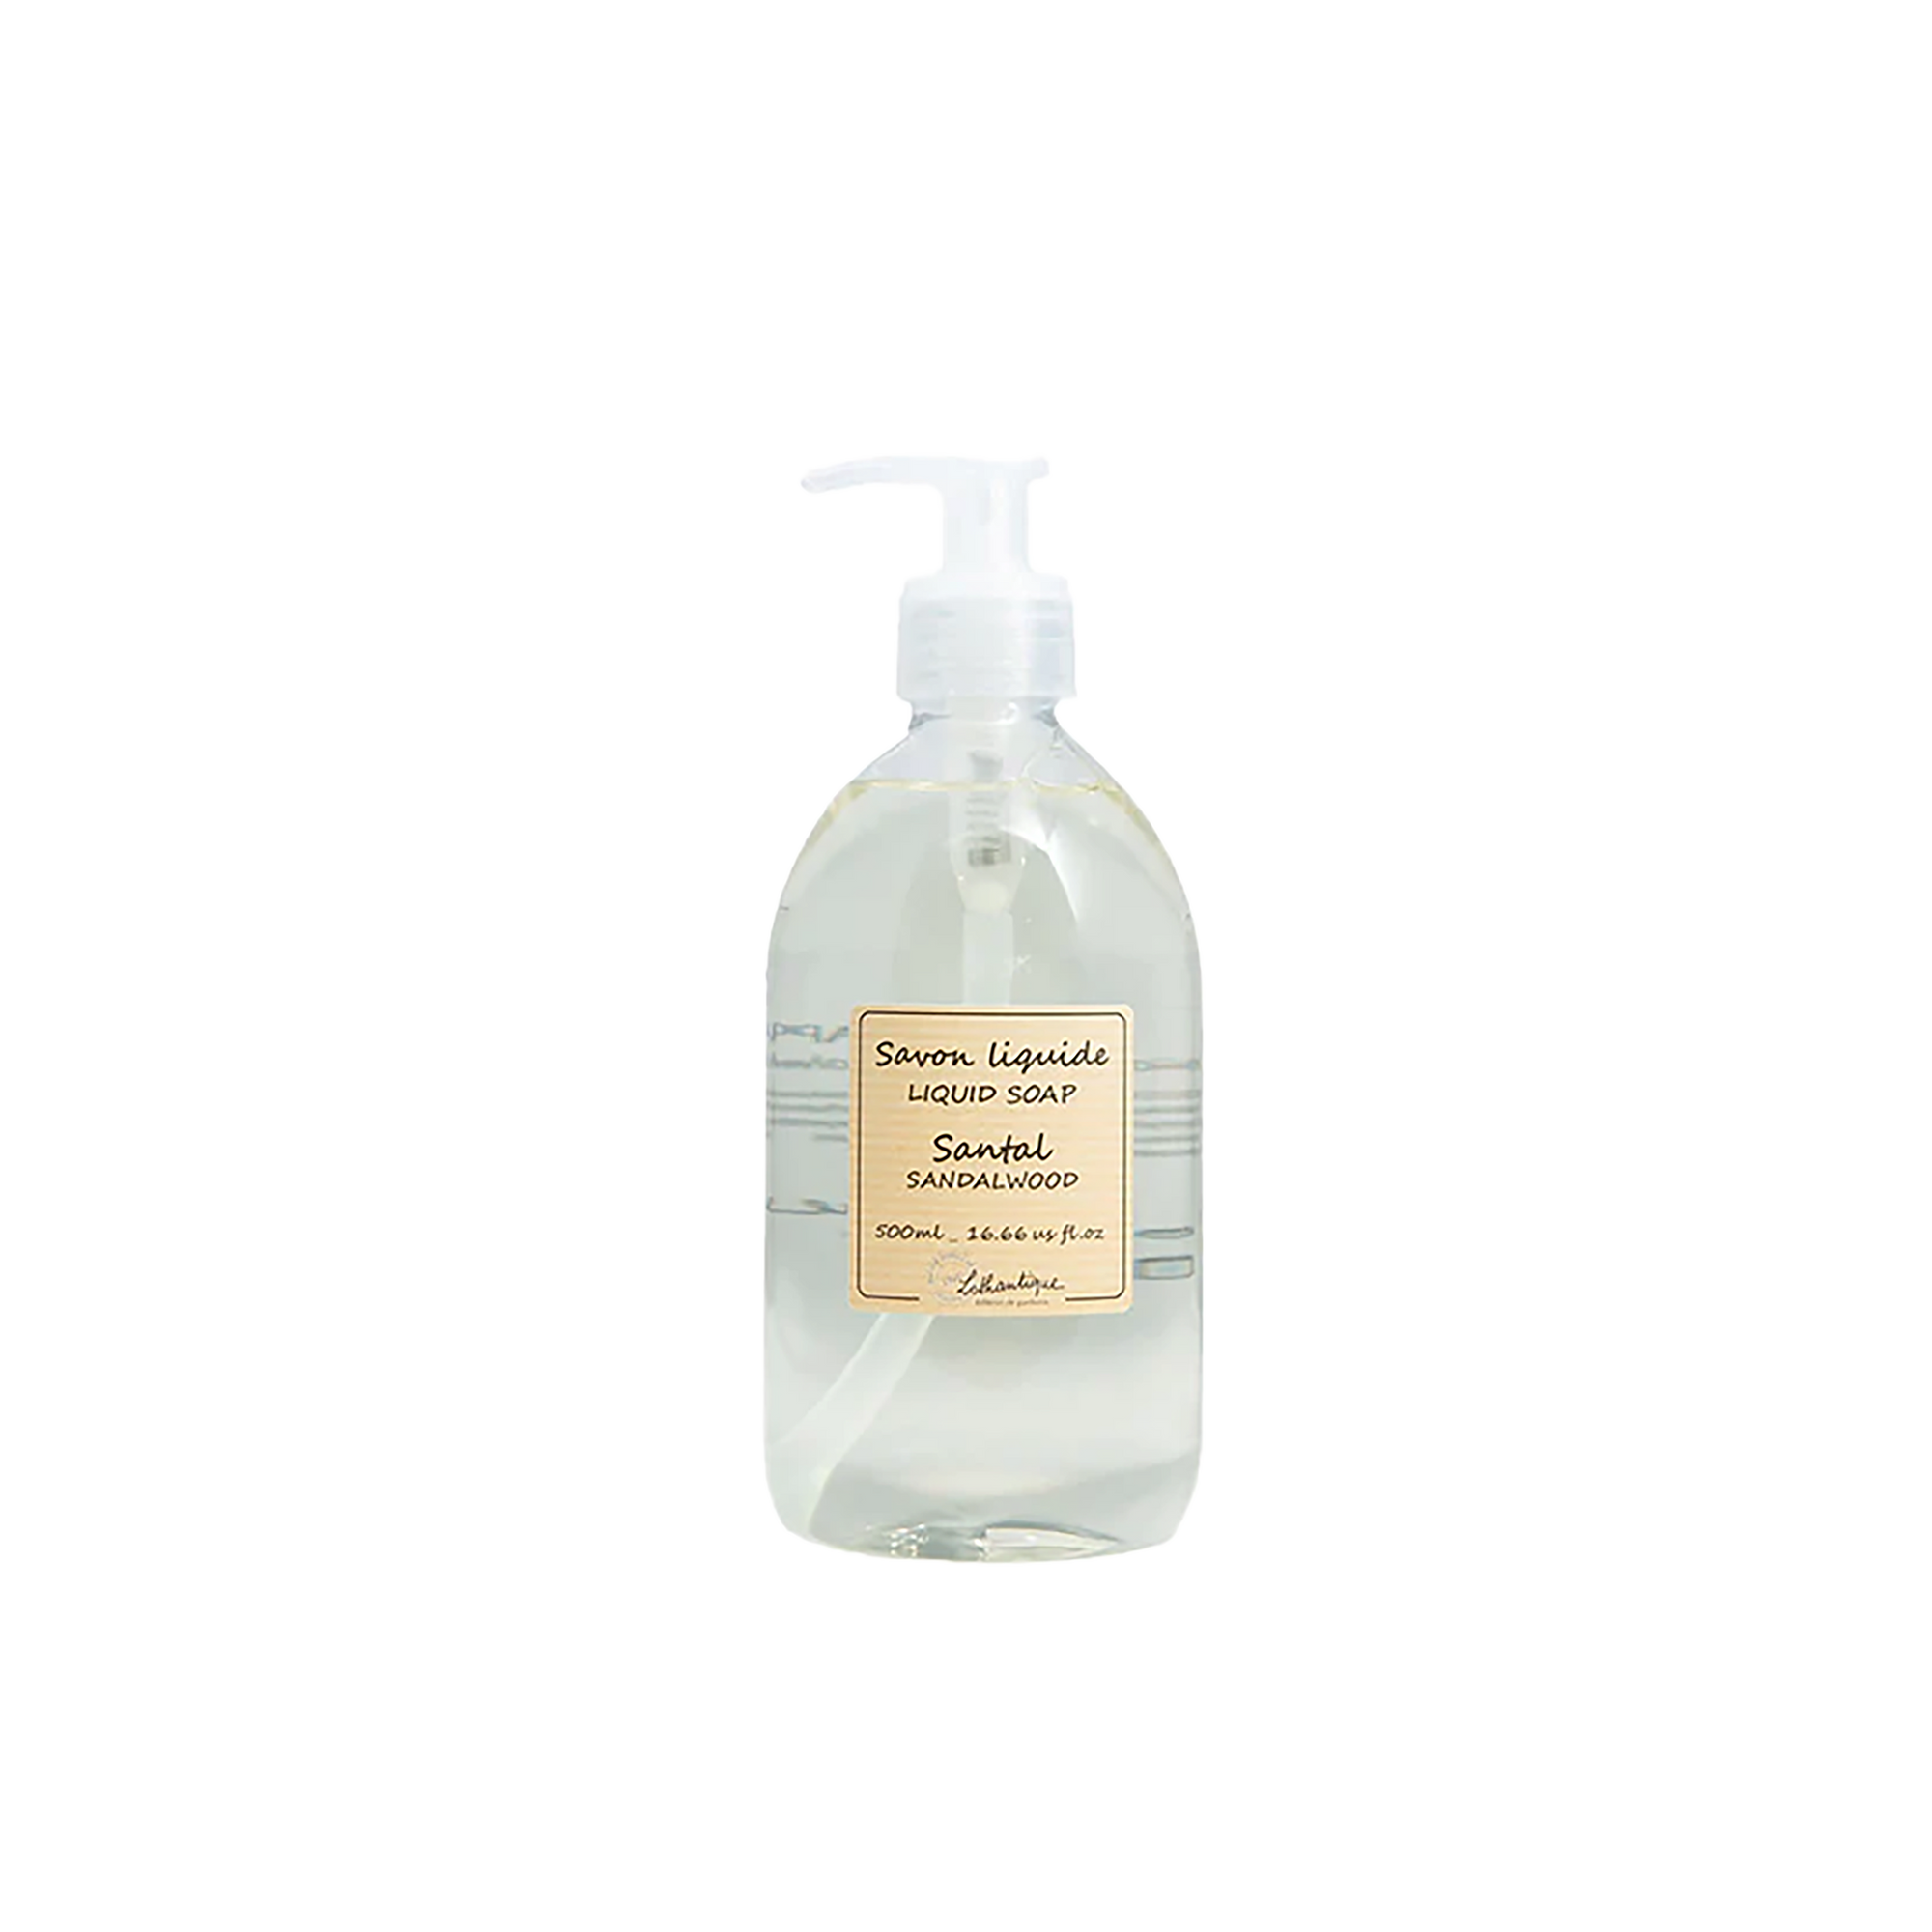 This Marseille-style liquid hand soap is vegetable-based and can be used in either the kitchen or the bathroom.